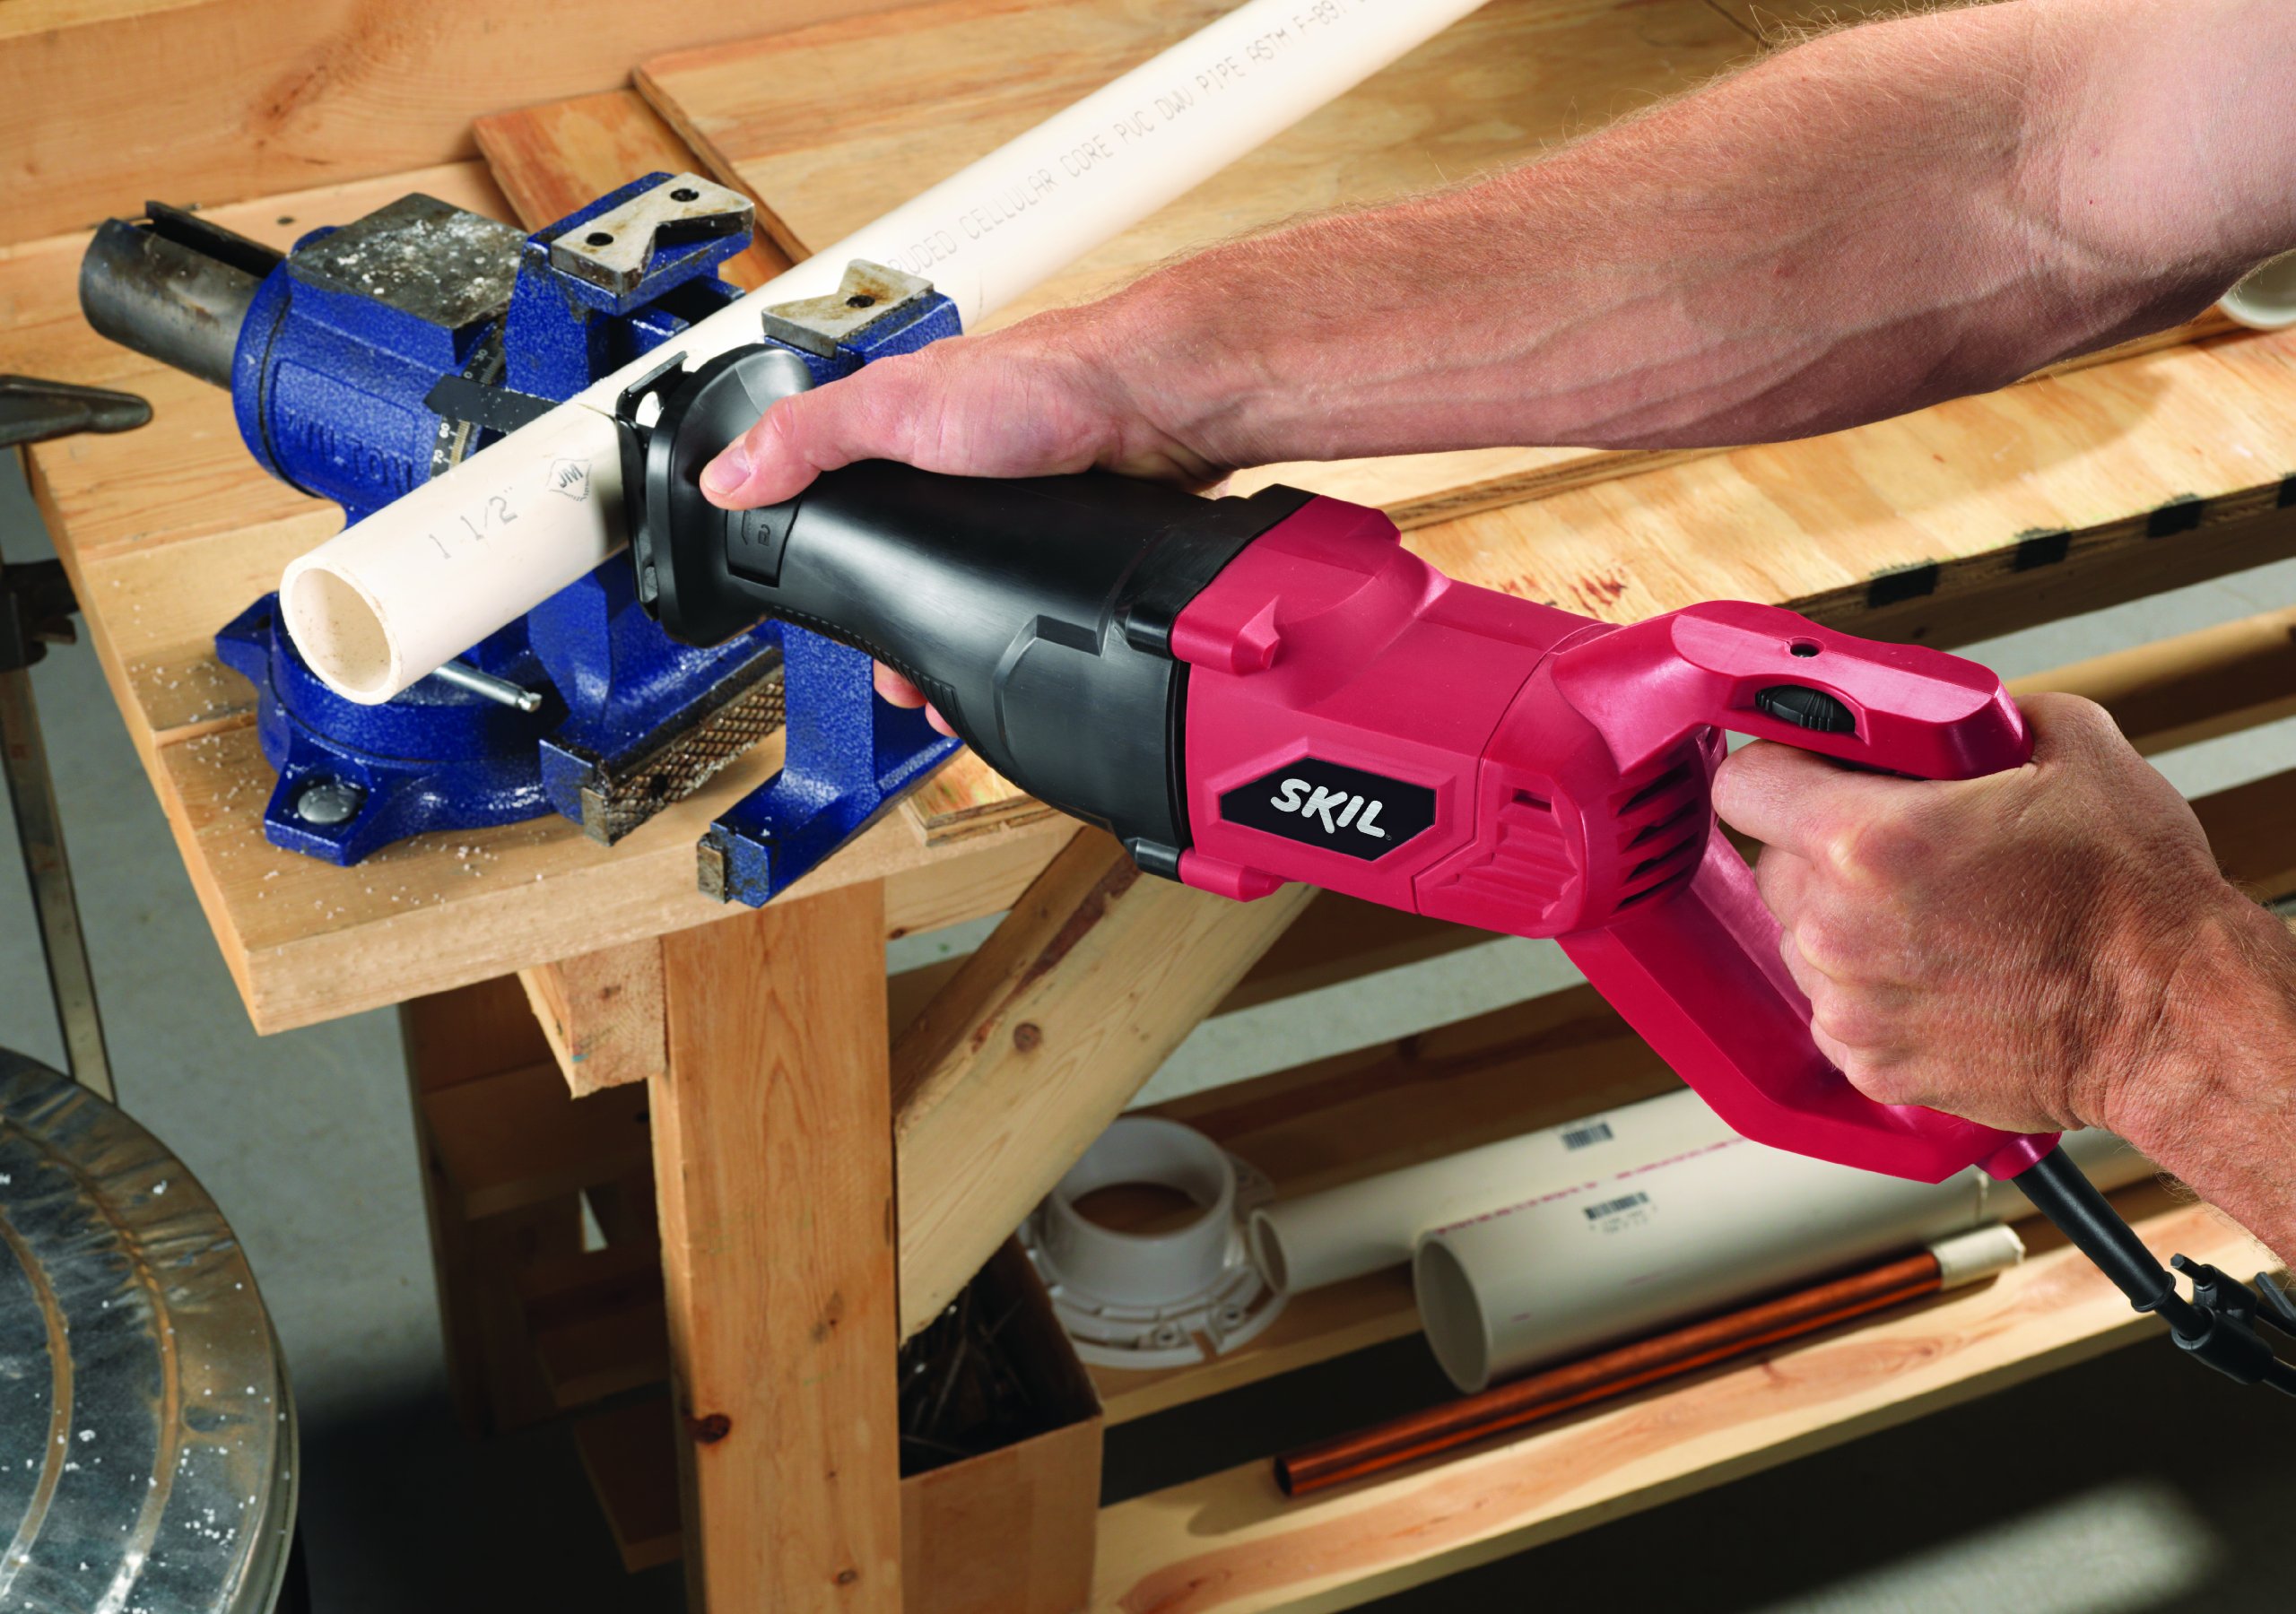 SKIL 9206-02 7.5-Amp Variable Speed Reciprocating Saw